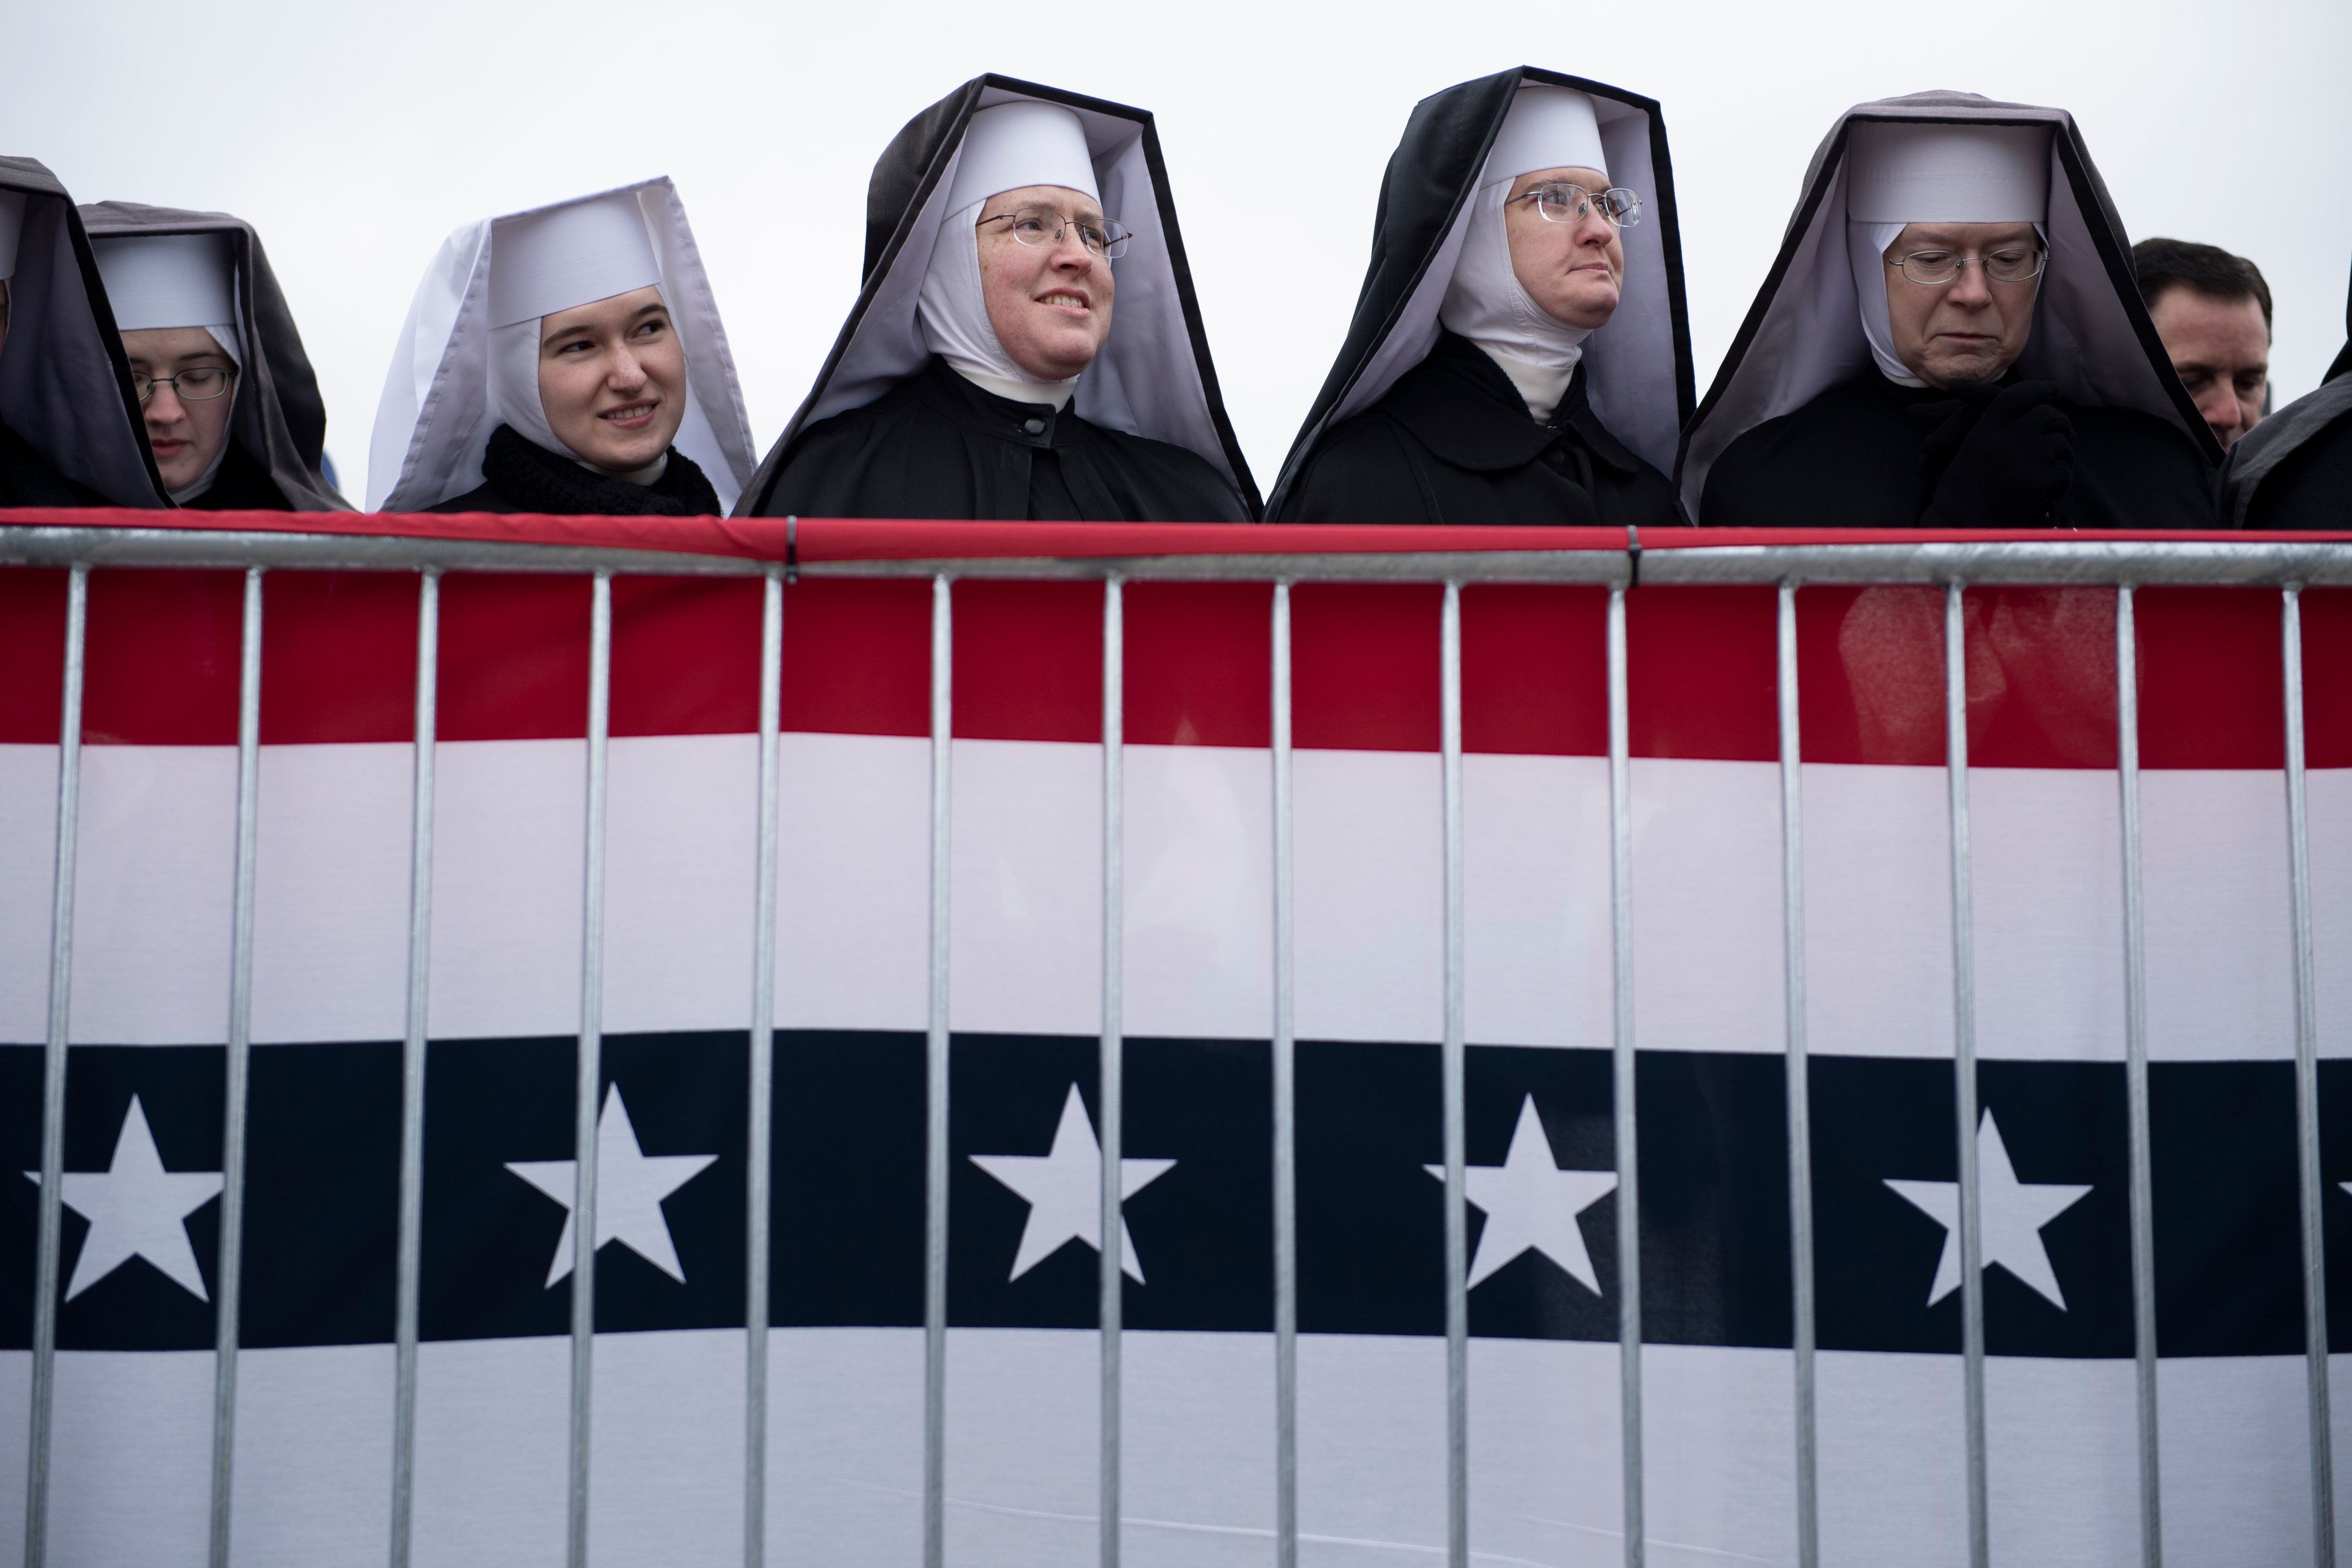  Little Sisters of the Poor wait for US President Donald Trump to speak during a "Make America Great Again" rally at Total Sports Park on November 1, 2020, in Washington, Michigan.